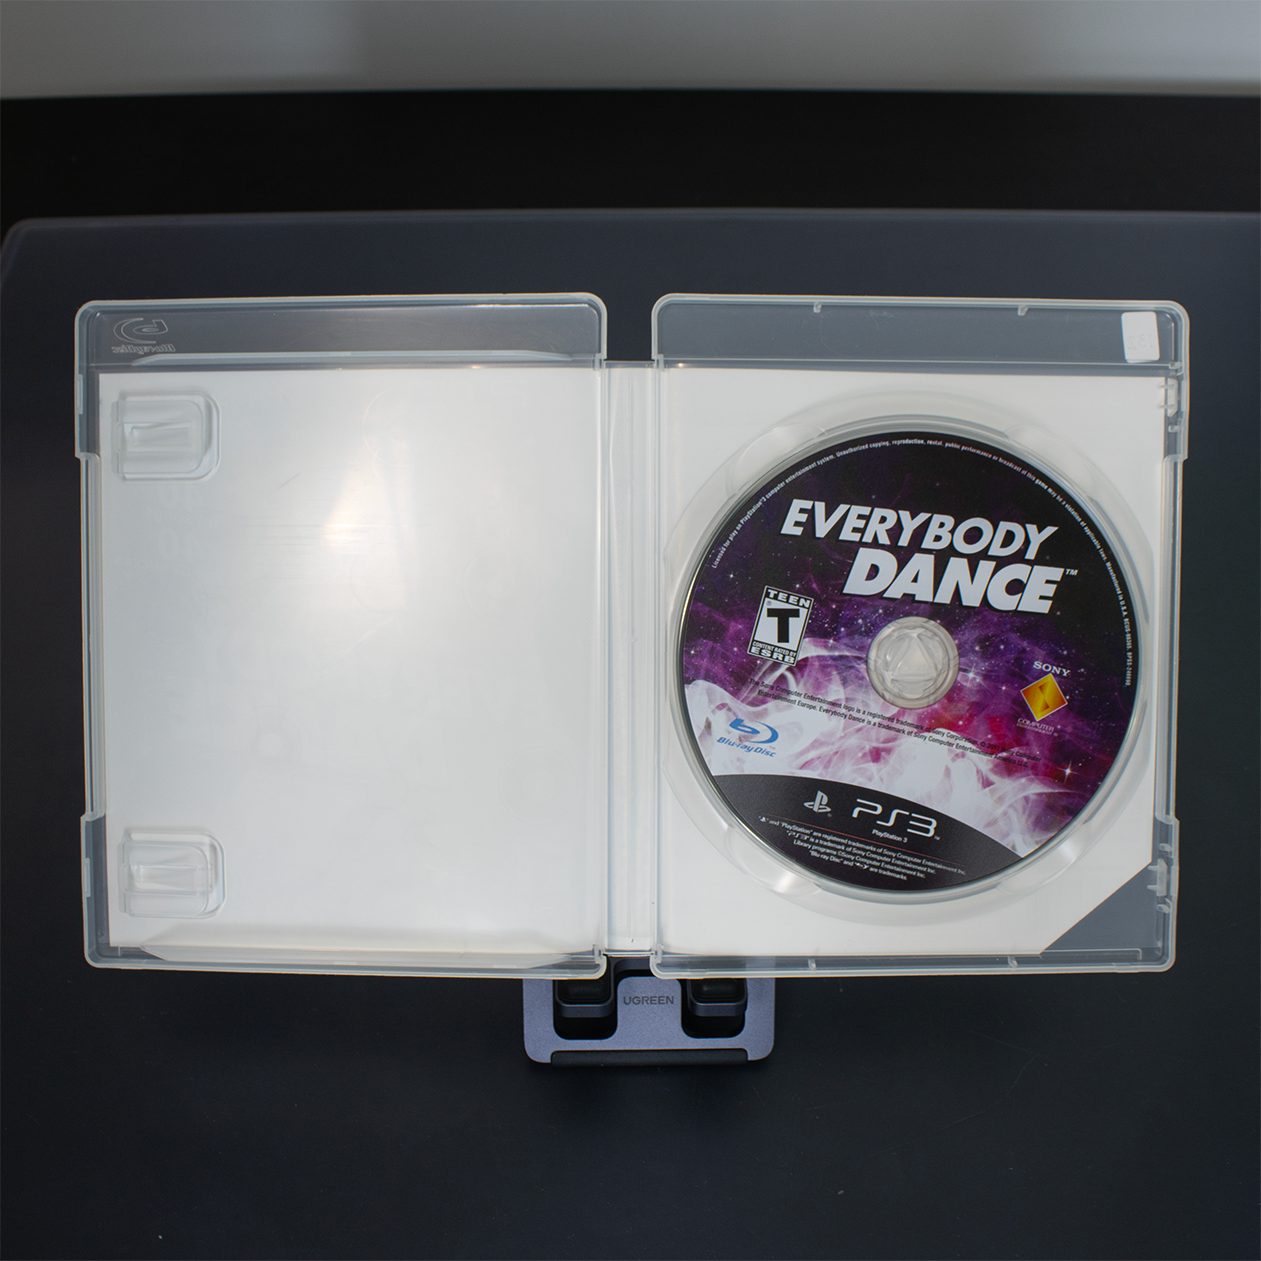 Everybody Dance - PS3 Game